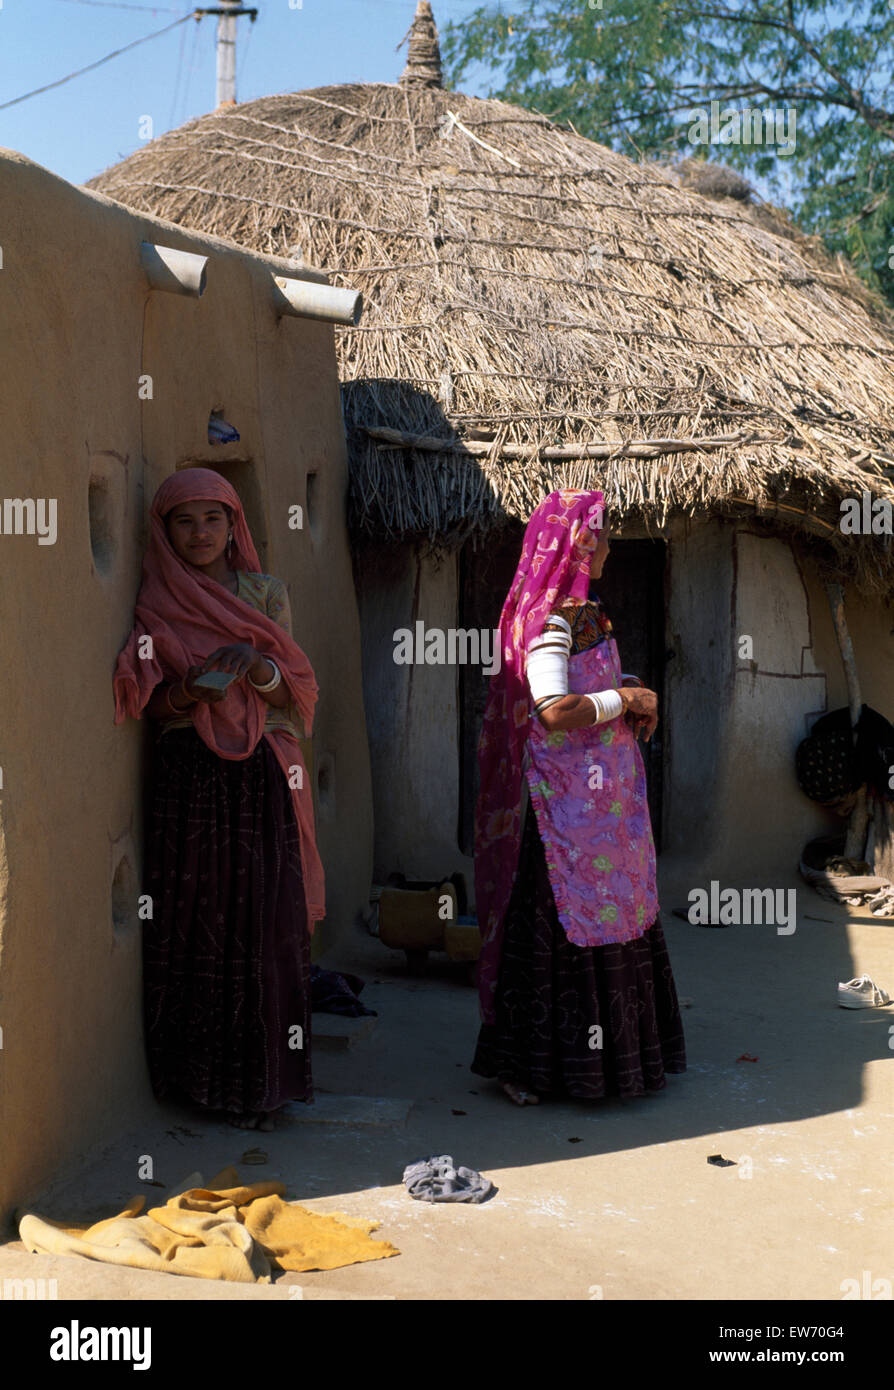 Two young Indian women wearing colorful saris standing in the shade of a hut in an Indian village         FOR EDITORIAL USE ONLY Stock Photo